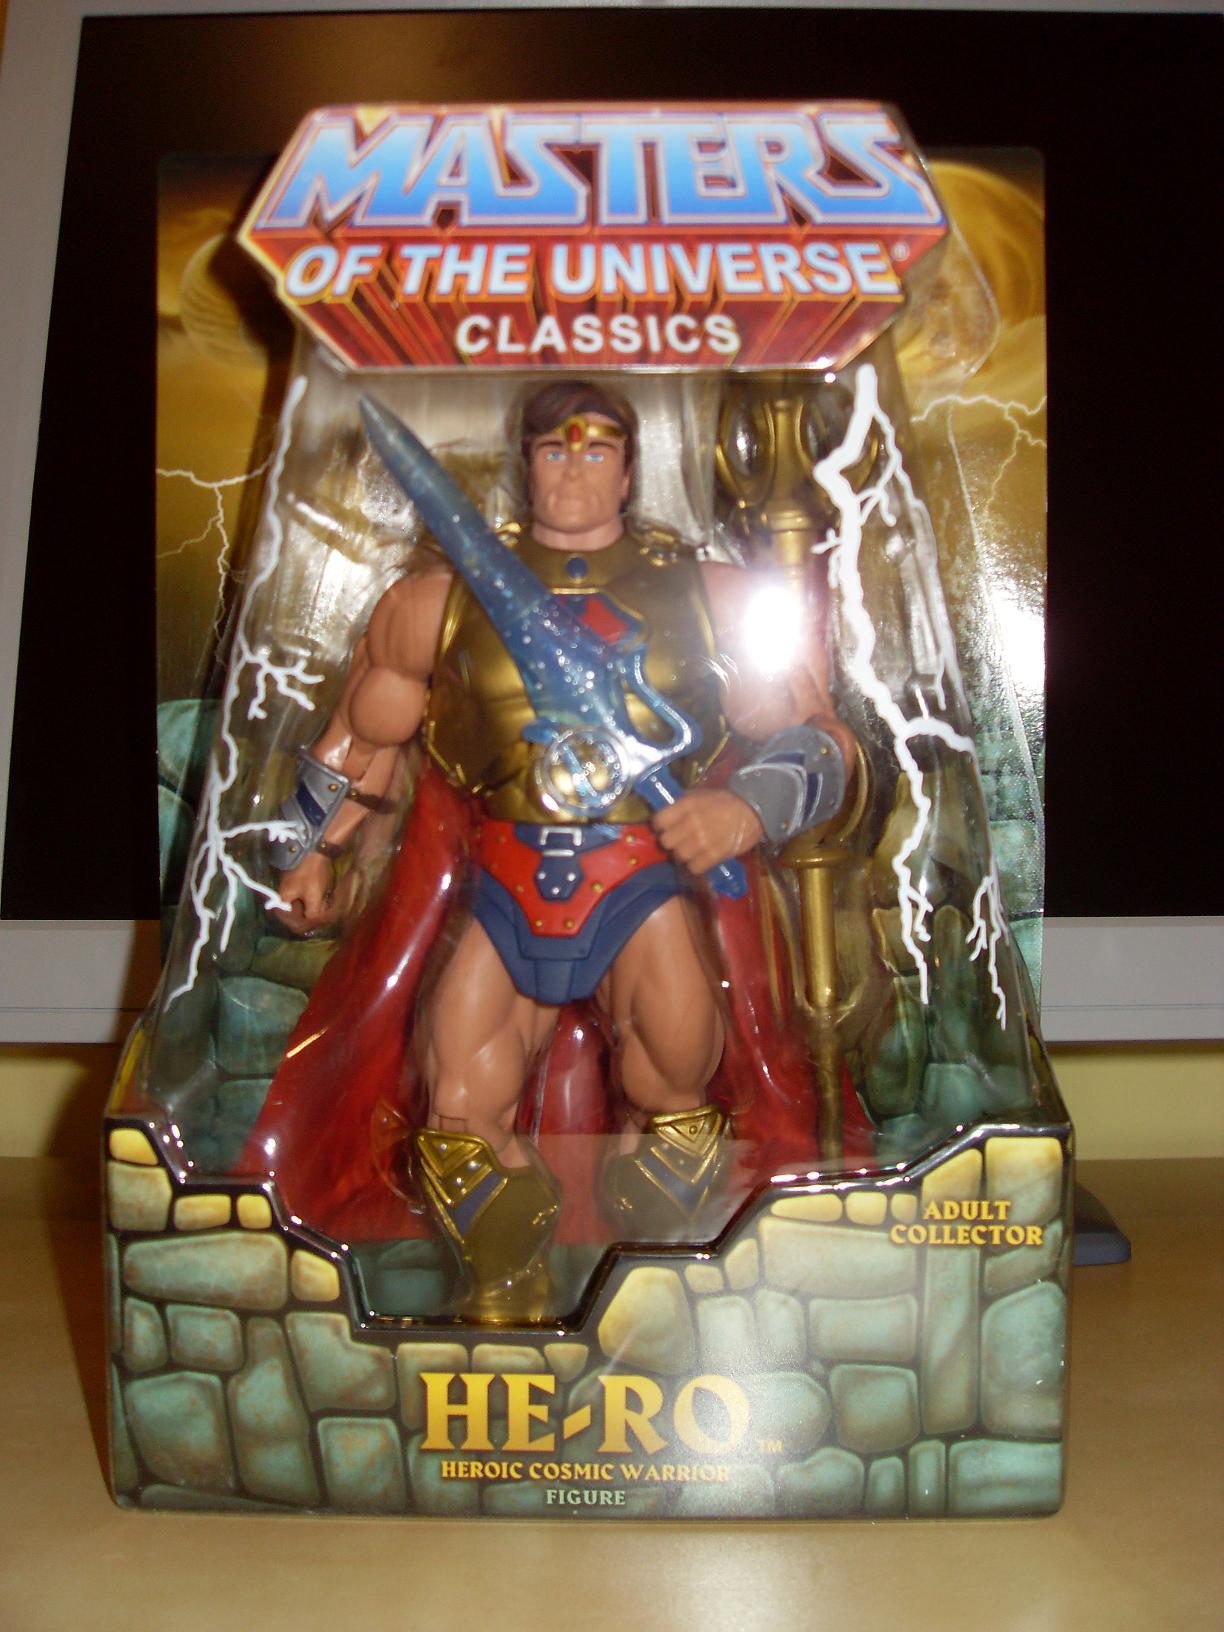 LORD HE-MAN Colecction 7983